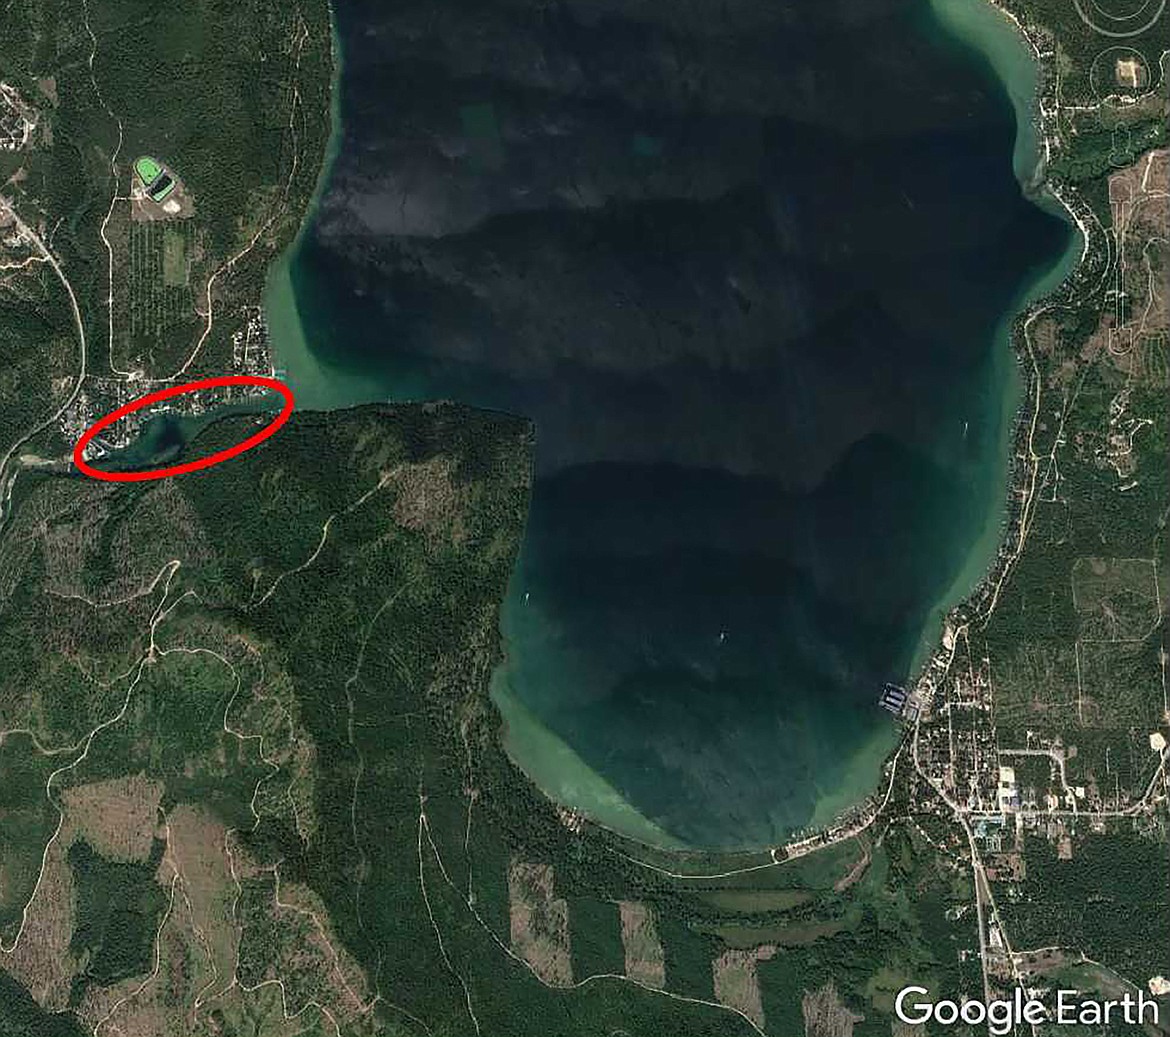 A harmful algae blooms has been detected at the Priest Lake Outlet. A red oval shows the HAB area, which runs from Outlet Bay Road to the dam.